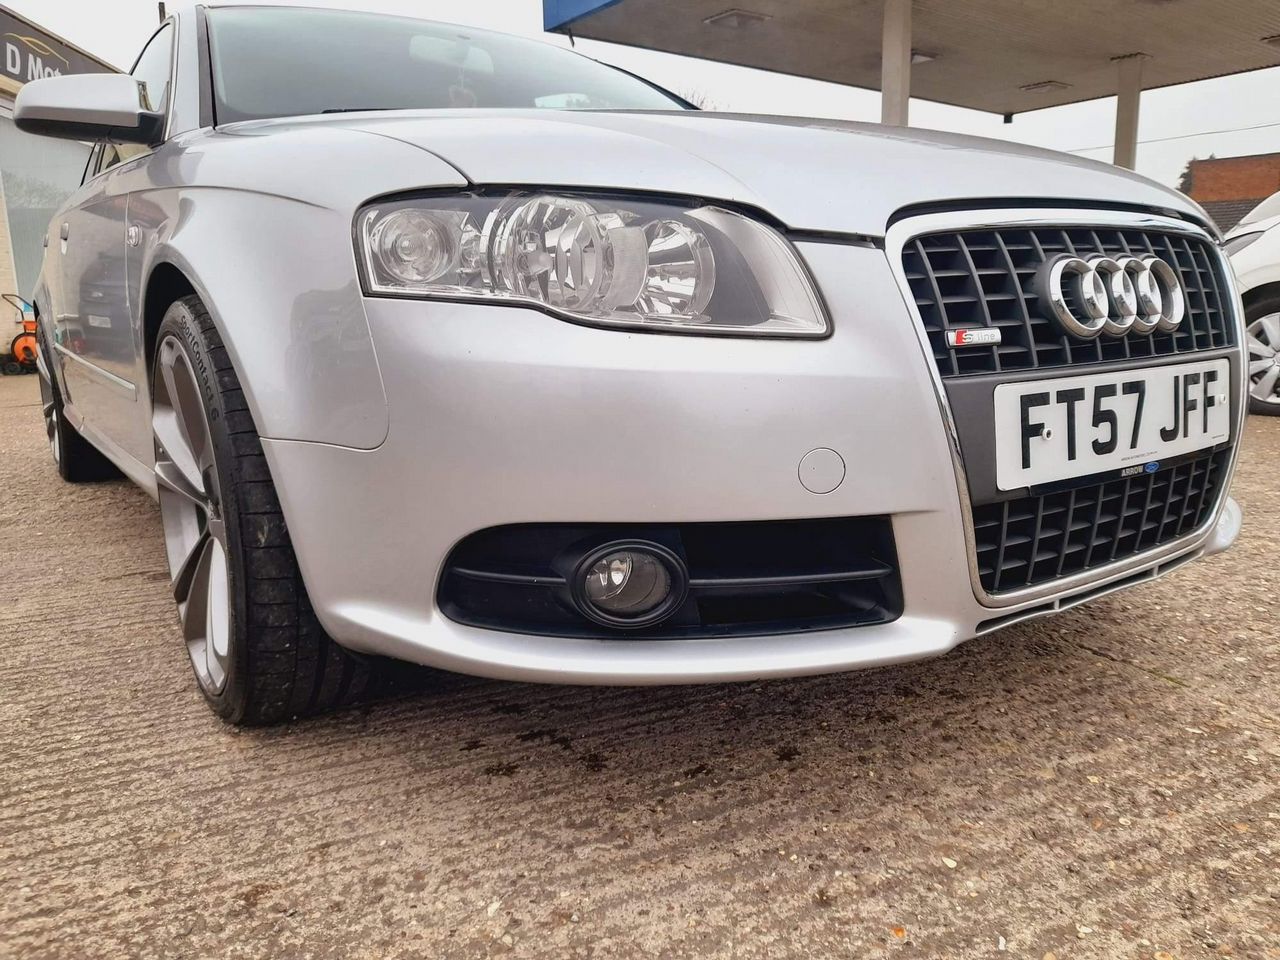 2008 Audi A4 2.0 TDI S line CVT 4dr - Picture 10 of 50